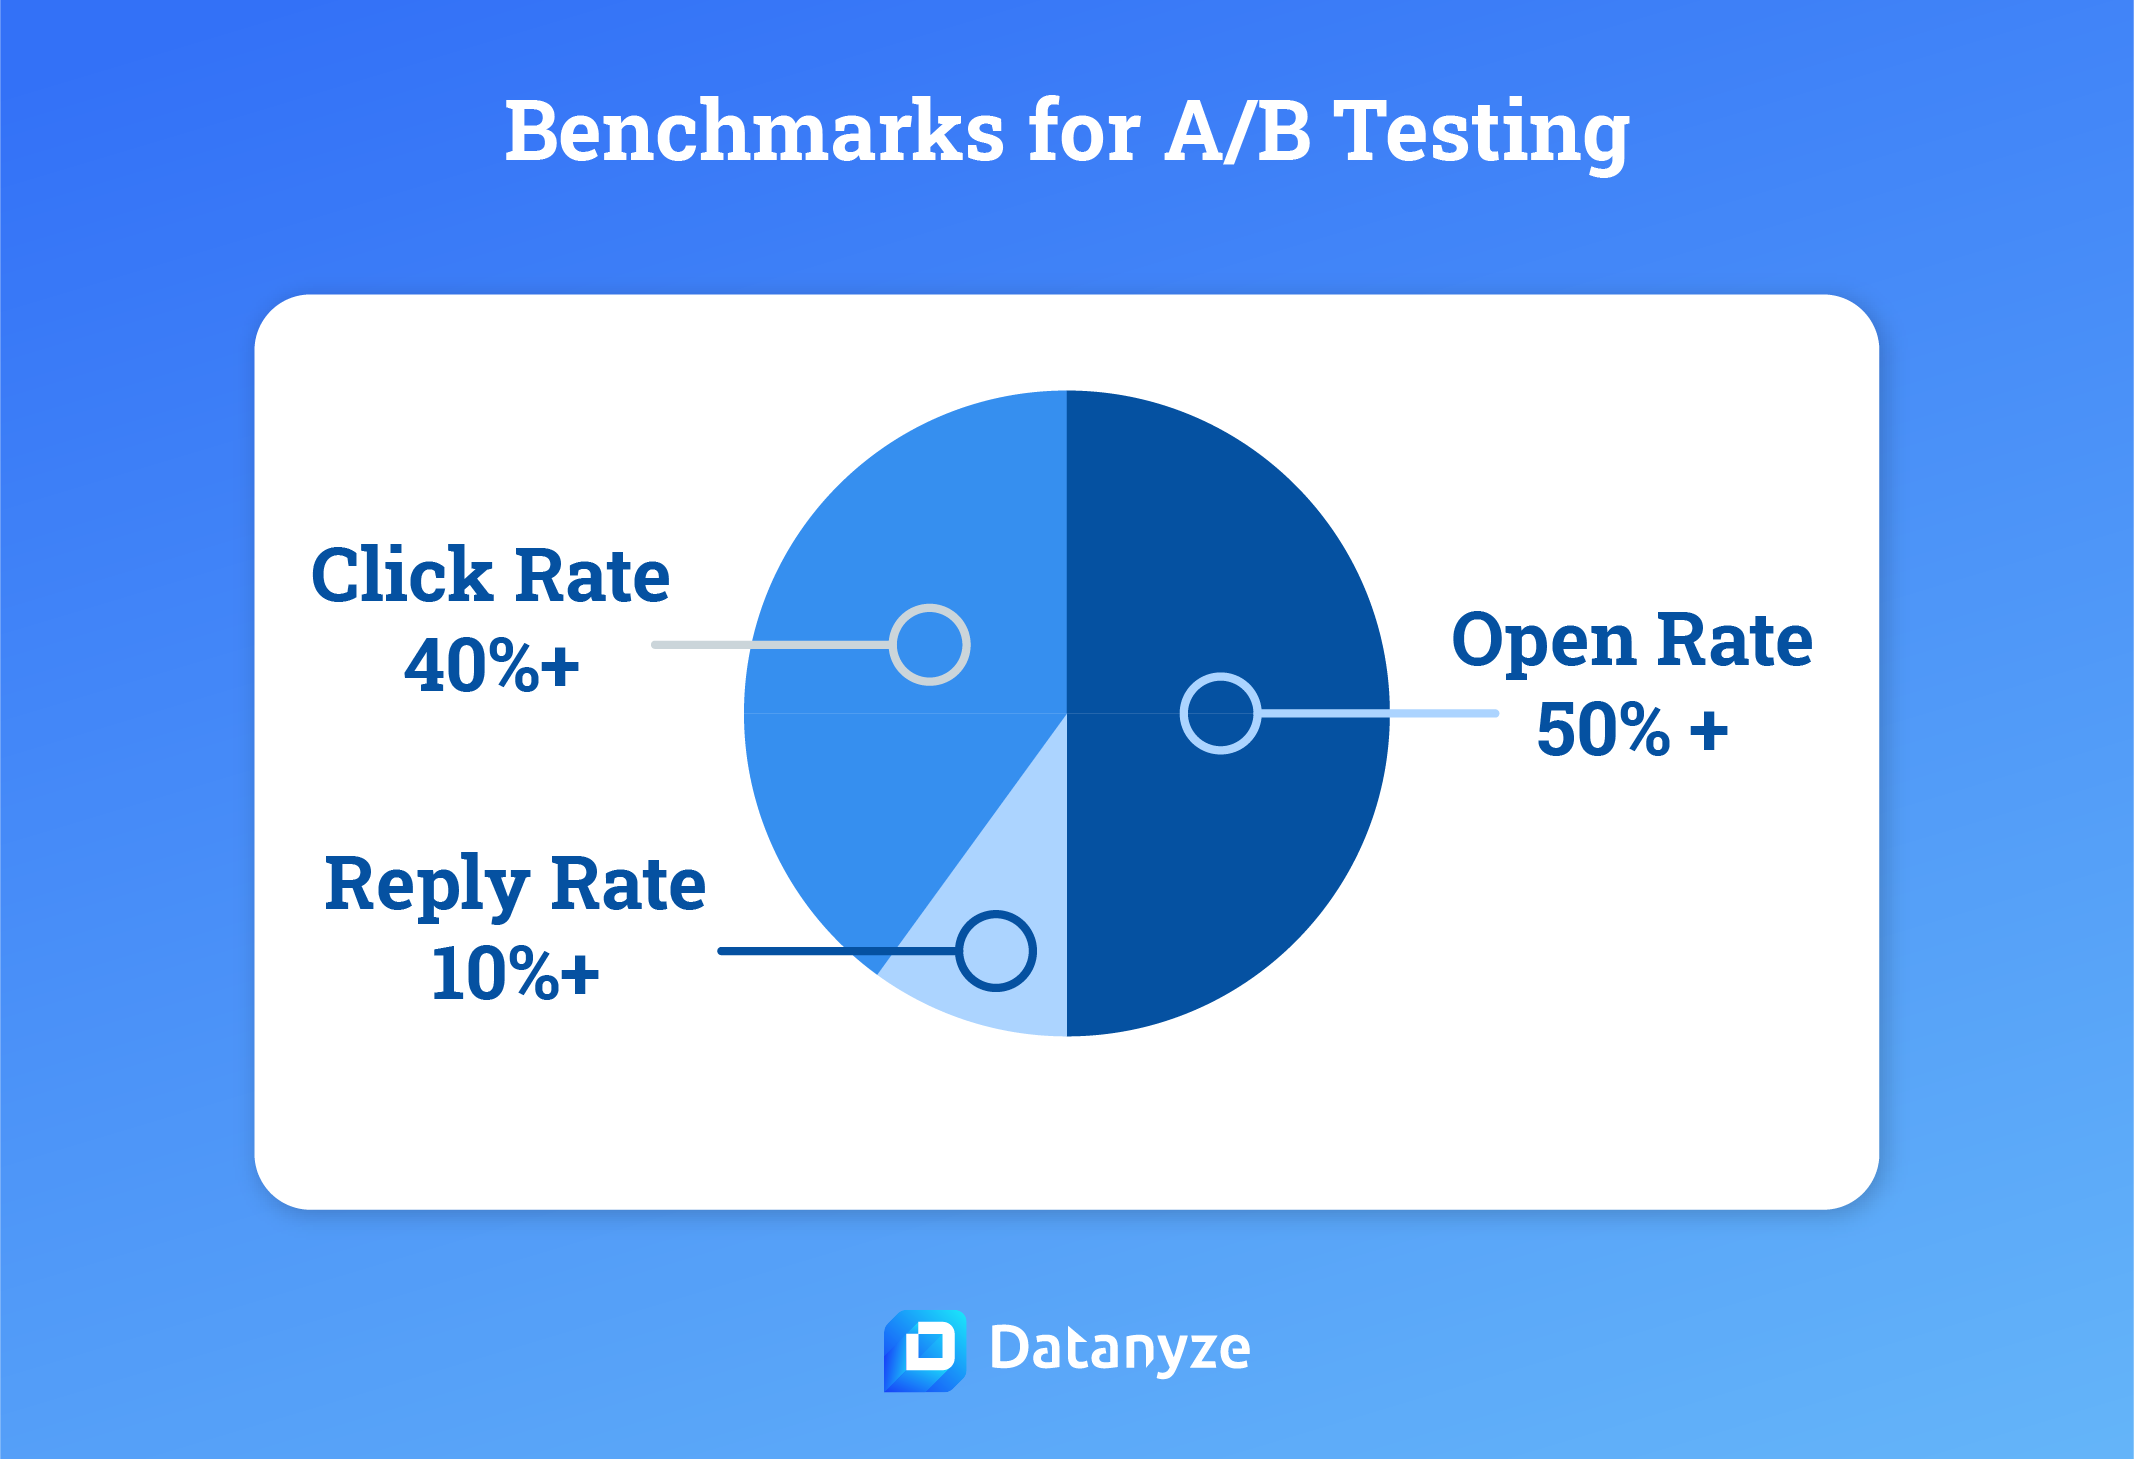 Benchmarks for A/B testing